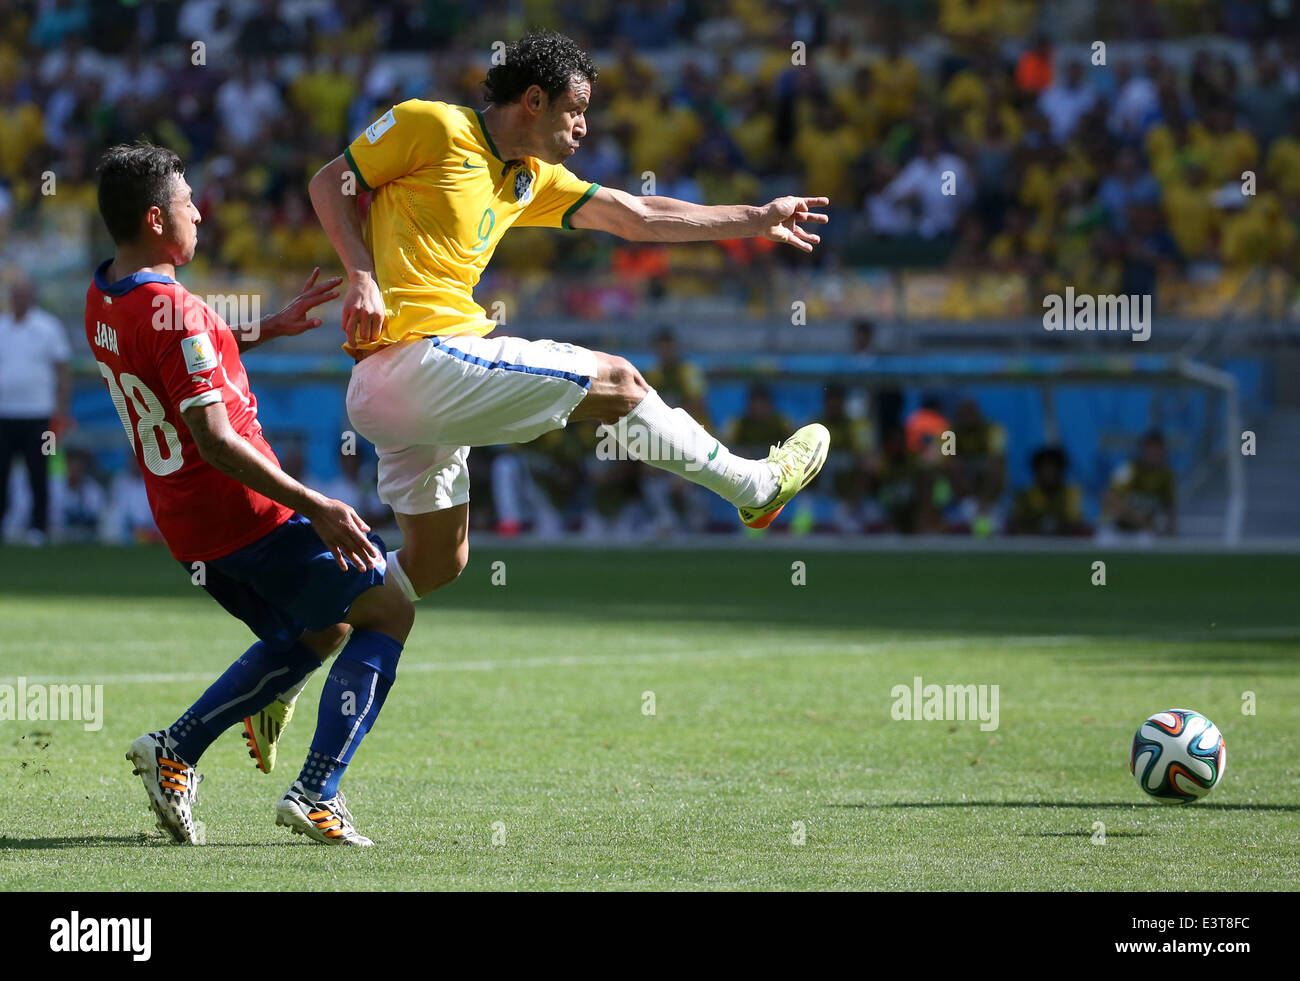 Belo Horizonte, Brazil. 28th June, 2014. Brazil's Fred vies with Chile's Gonzalo Jara during a Round of 16 match between Brazil and Chile of 2014 FIFA World Cup at the Estadio Mineirao Stadium in Belo Horizonte, Brazil, on June 28, 2014. Credit:  Li Ming/Xinhua/Alamy Live News Stock Photo